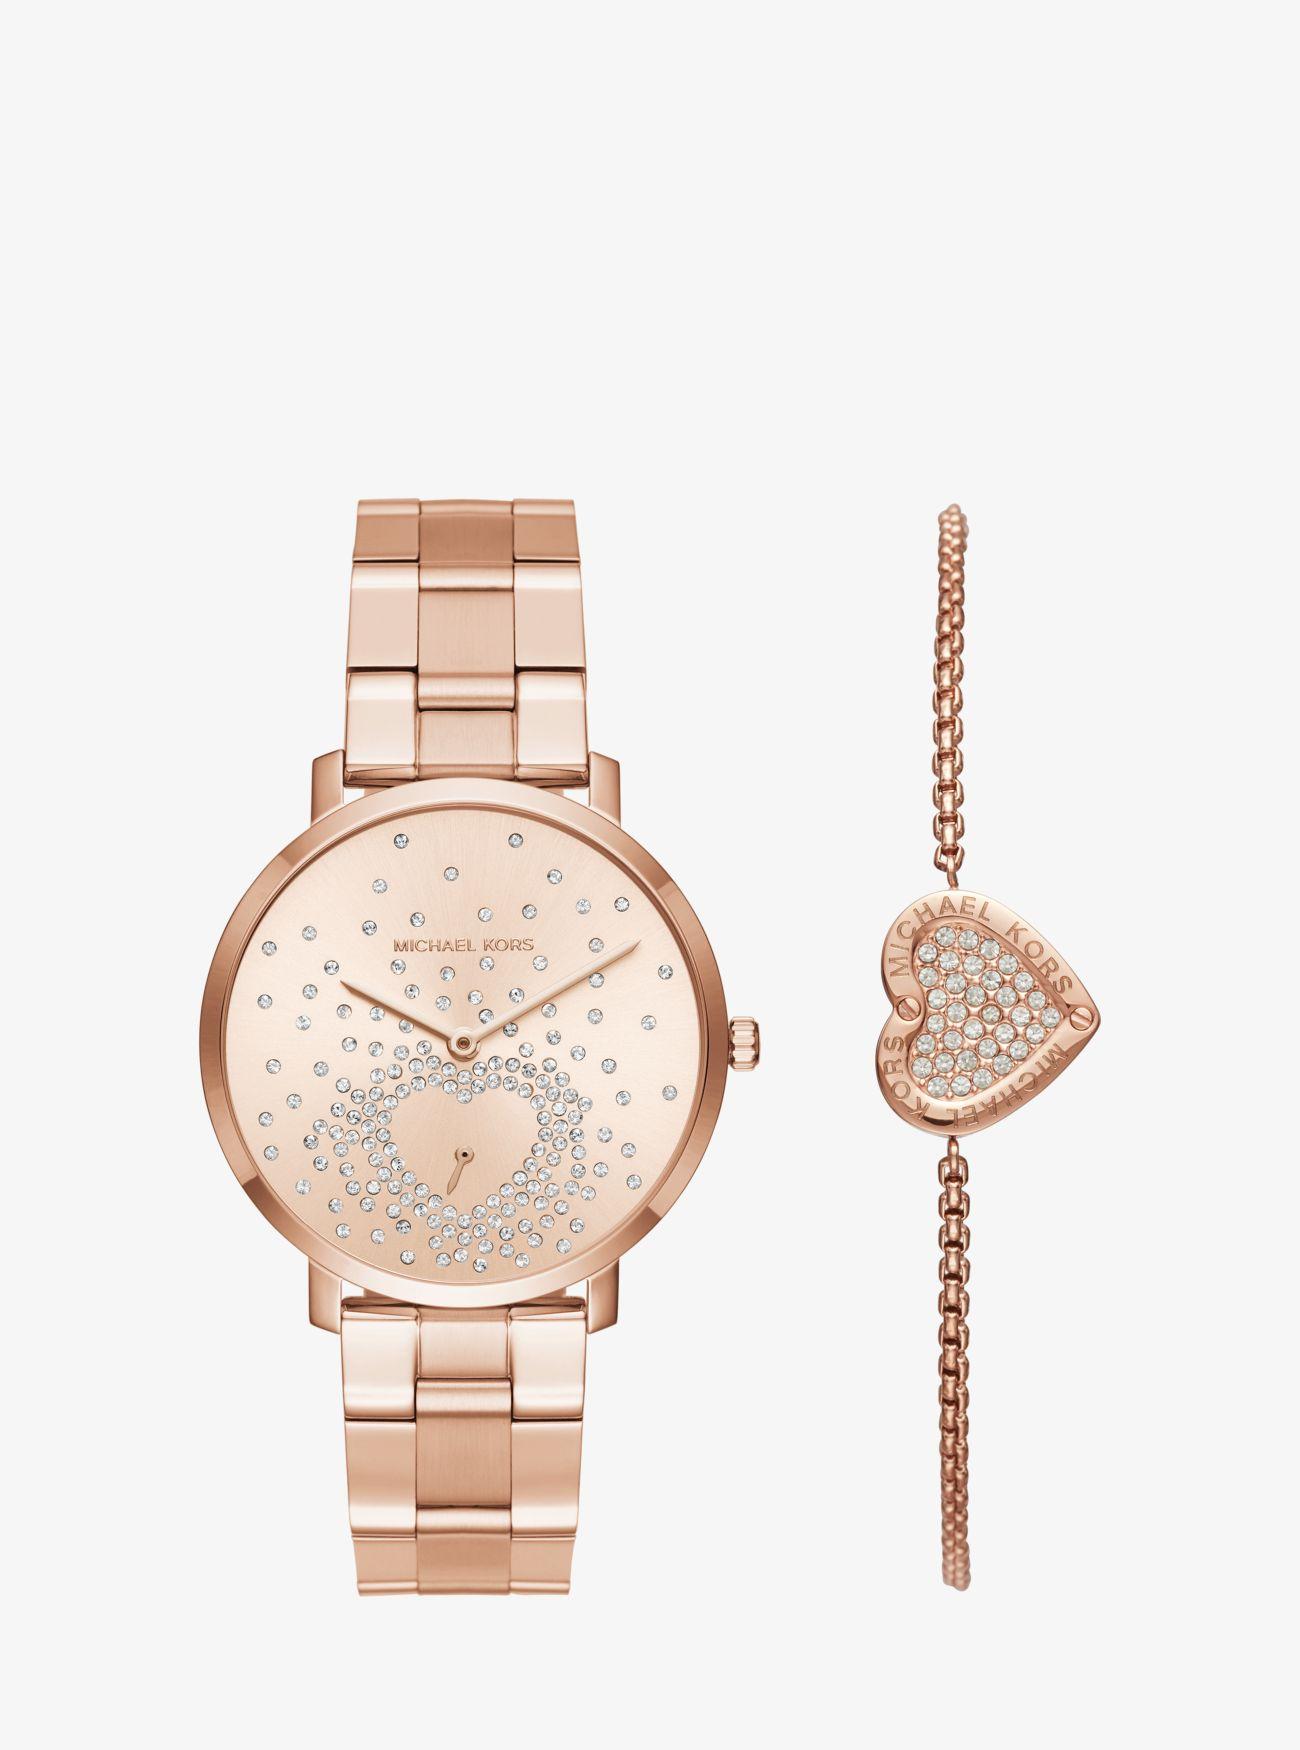 Lyst - Michael kors Jaryn Rose Gold-tone Watch And  